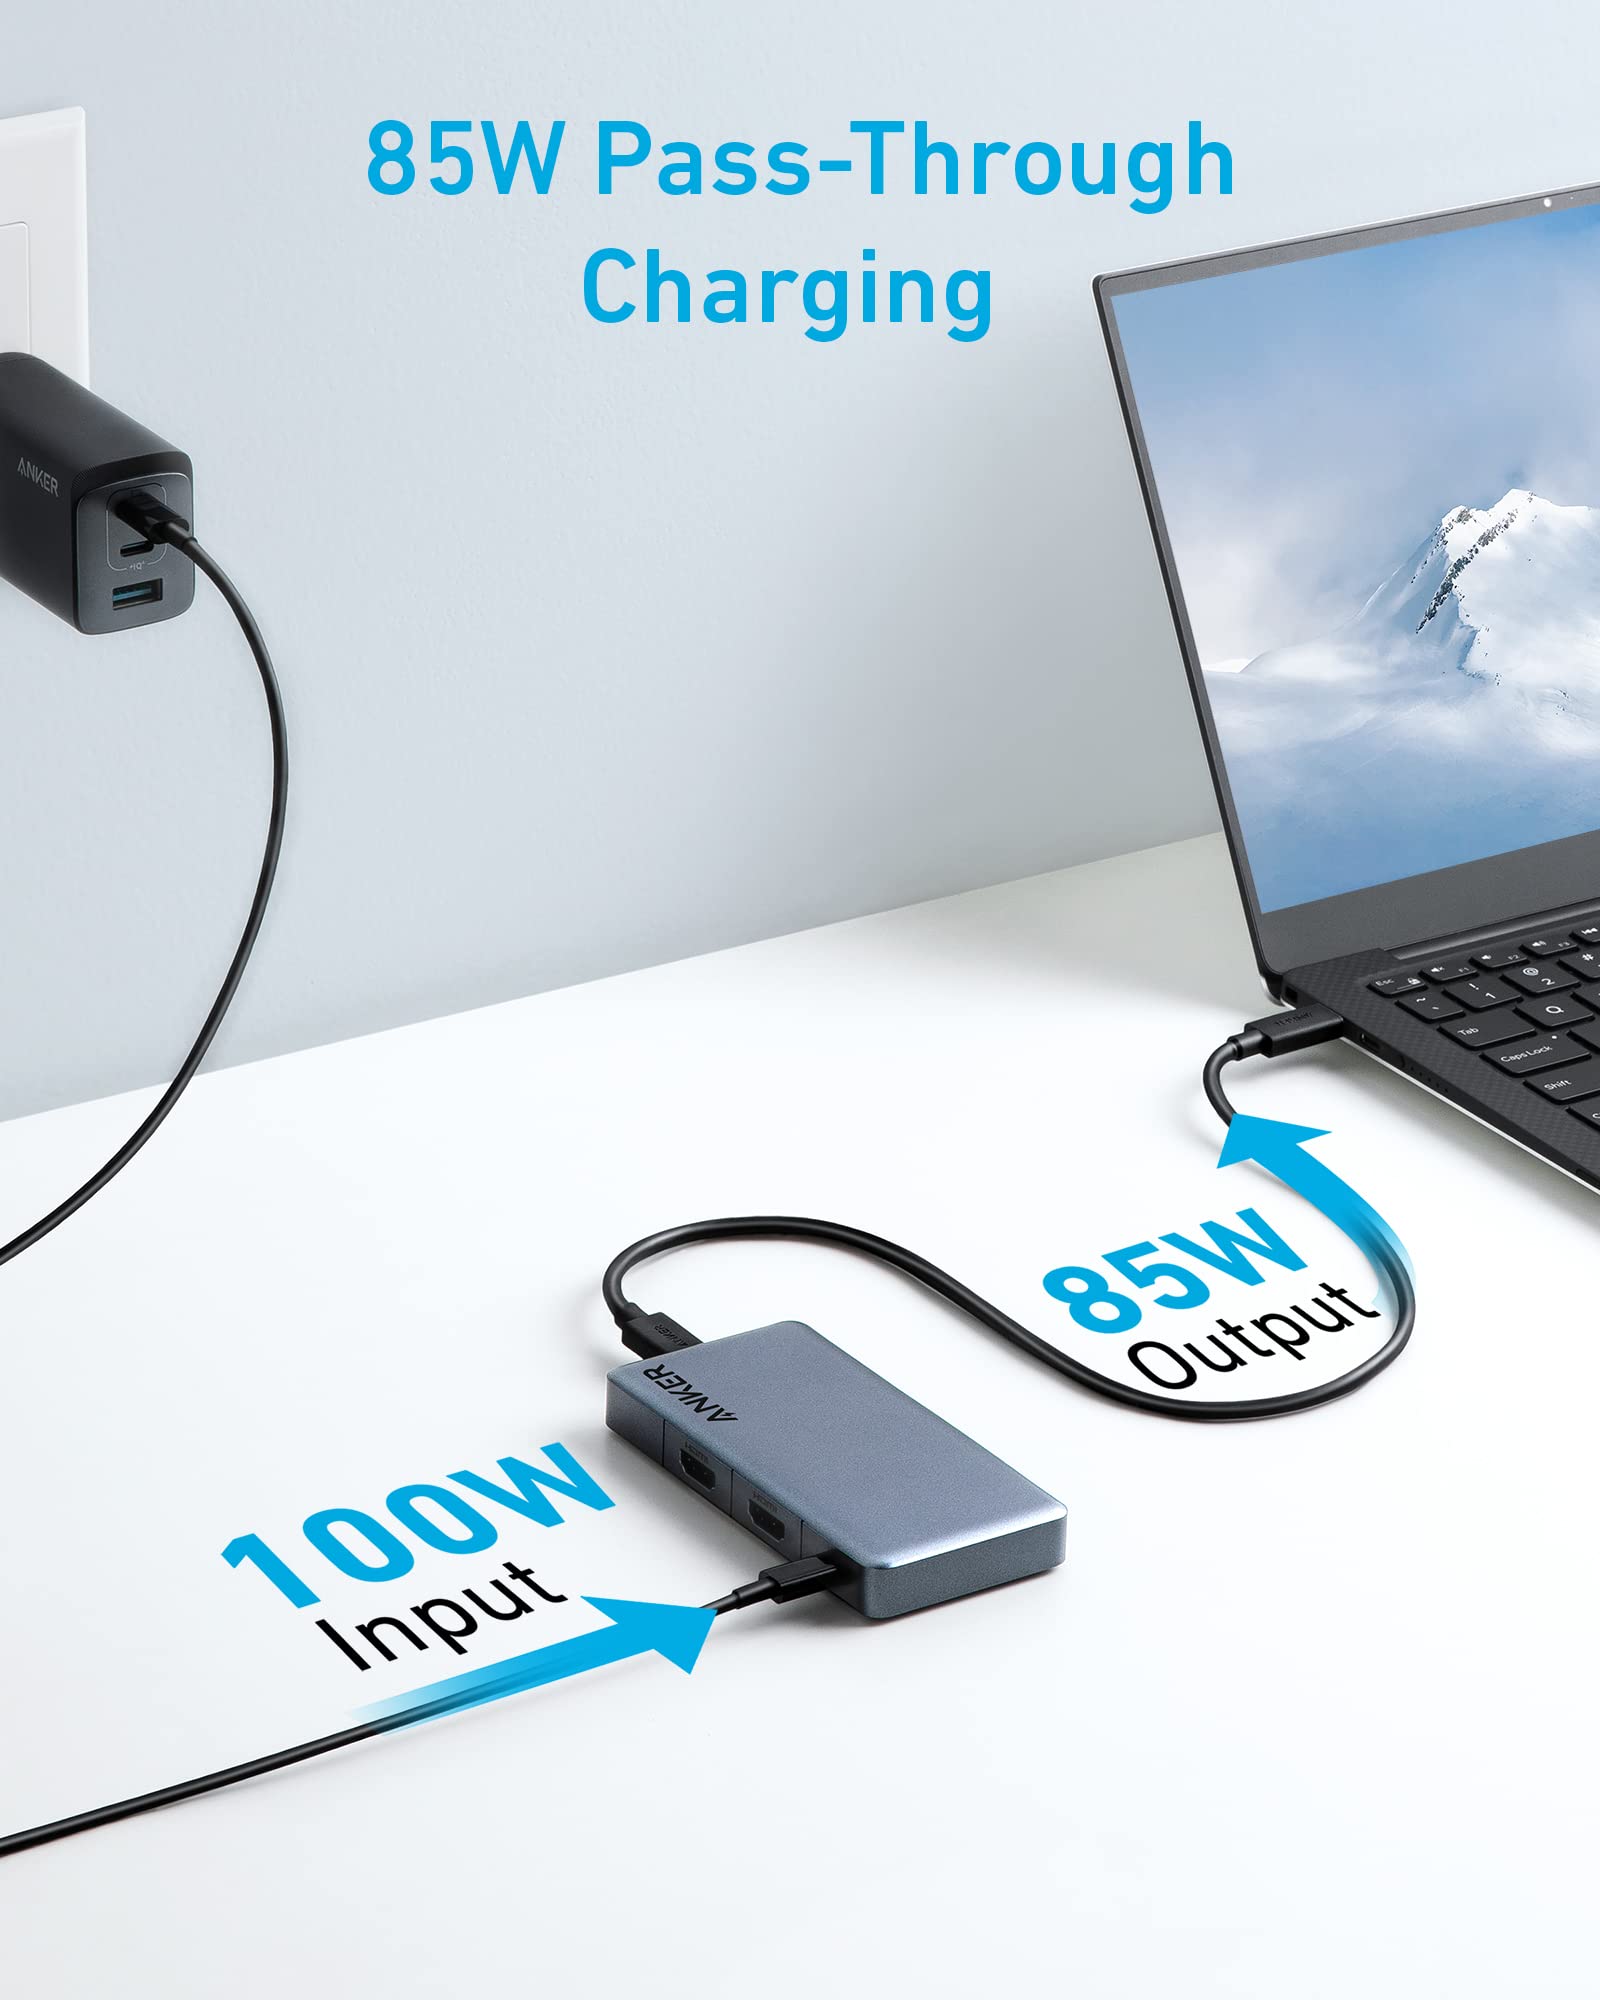 Anker USB C Hub, Anker 343 USB C Hub (7-in-1, Dual 4K HDMI) with 100W Power Delivery, Dual 4K HDMI Ports, a USB-C Upstream Port, 3 5Gbps USB-A and USB-C Data Ports for Dell Laptop, ThinkPad, and More